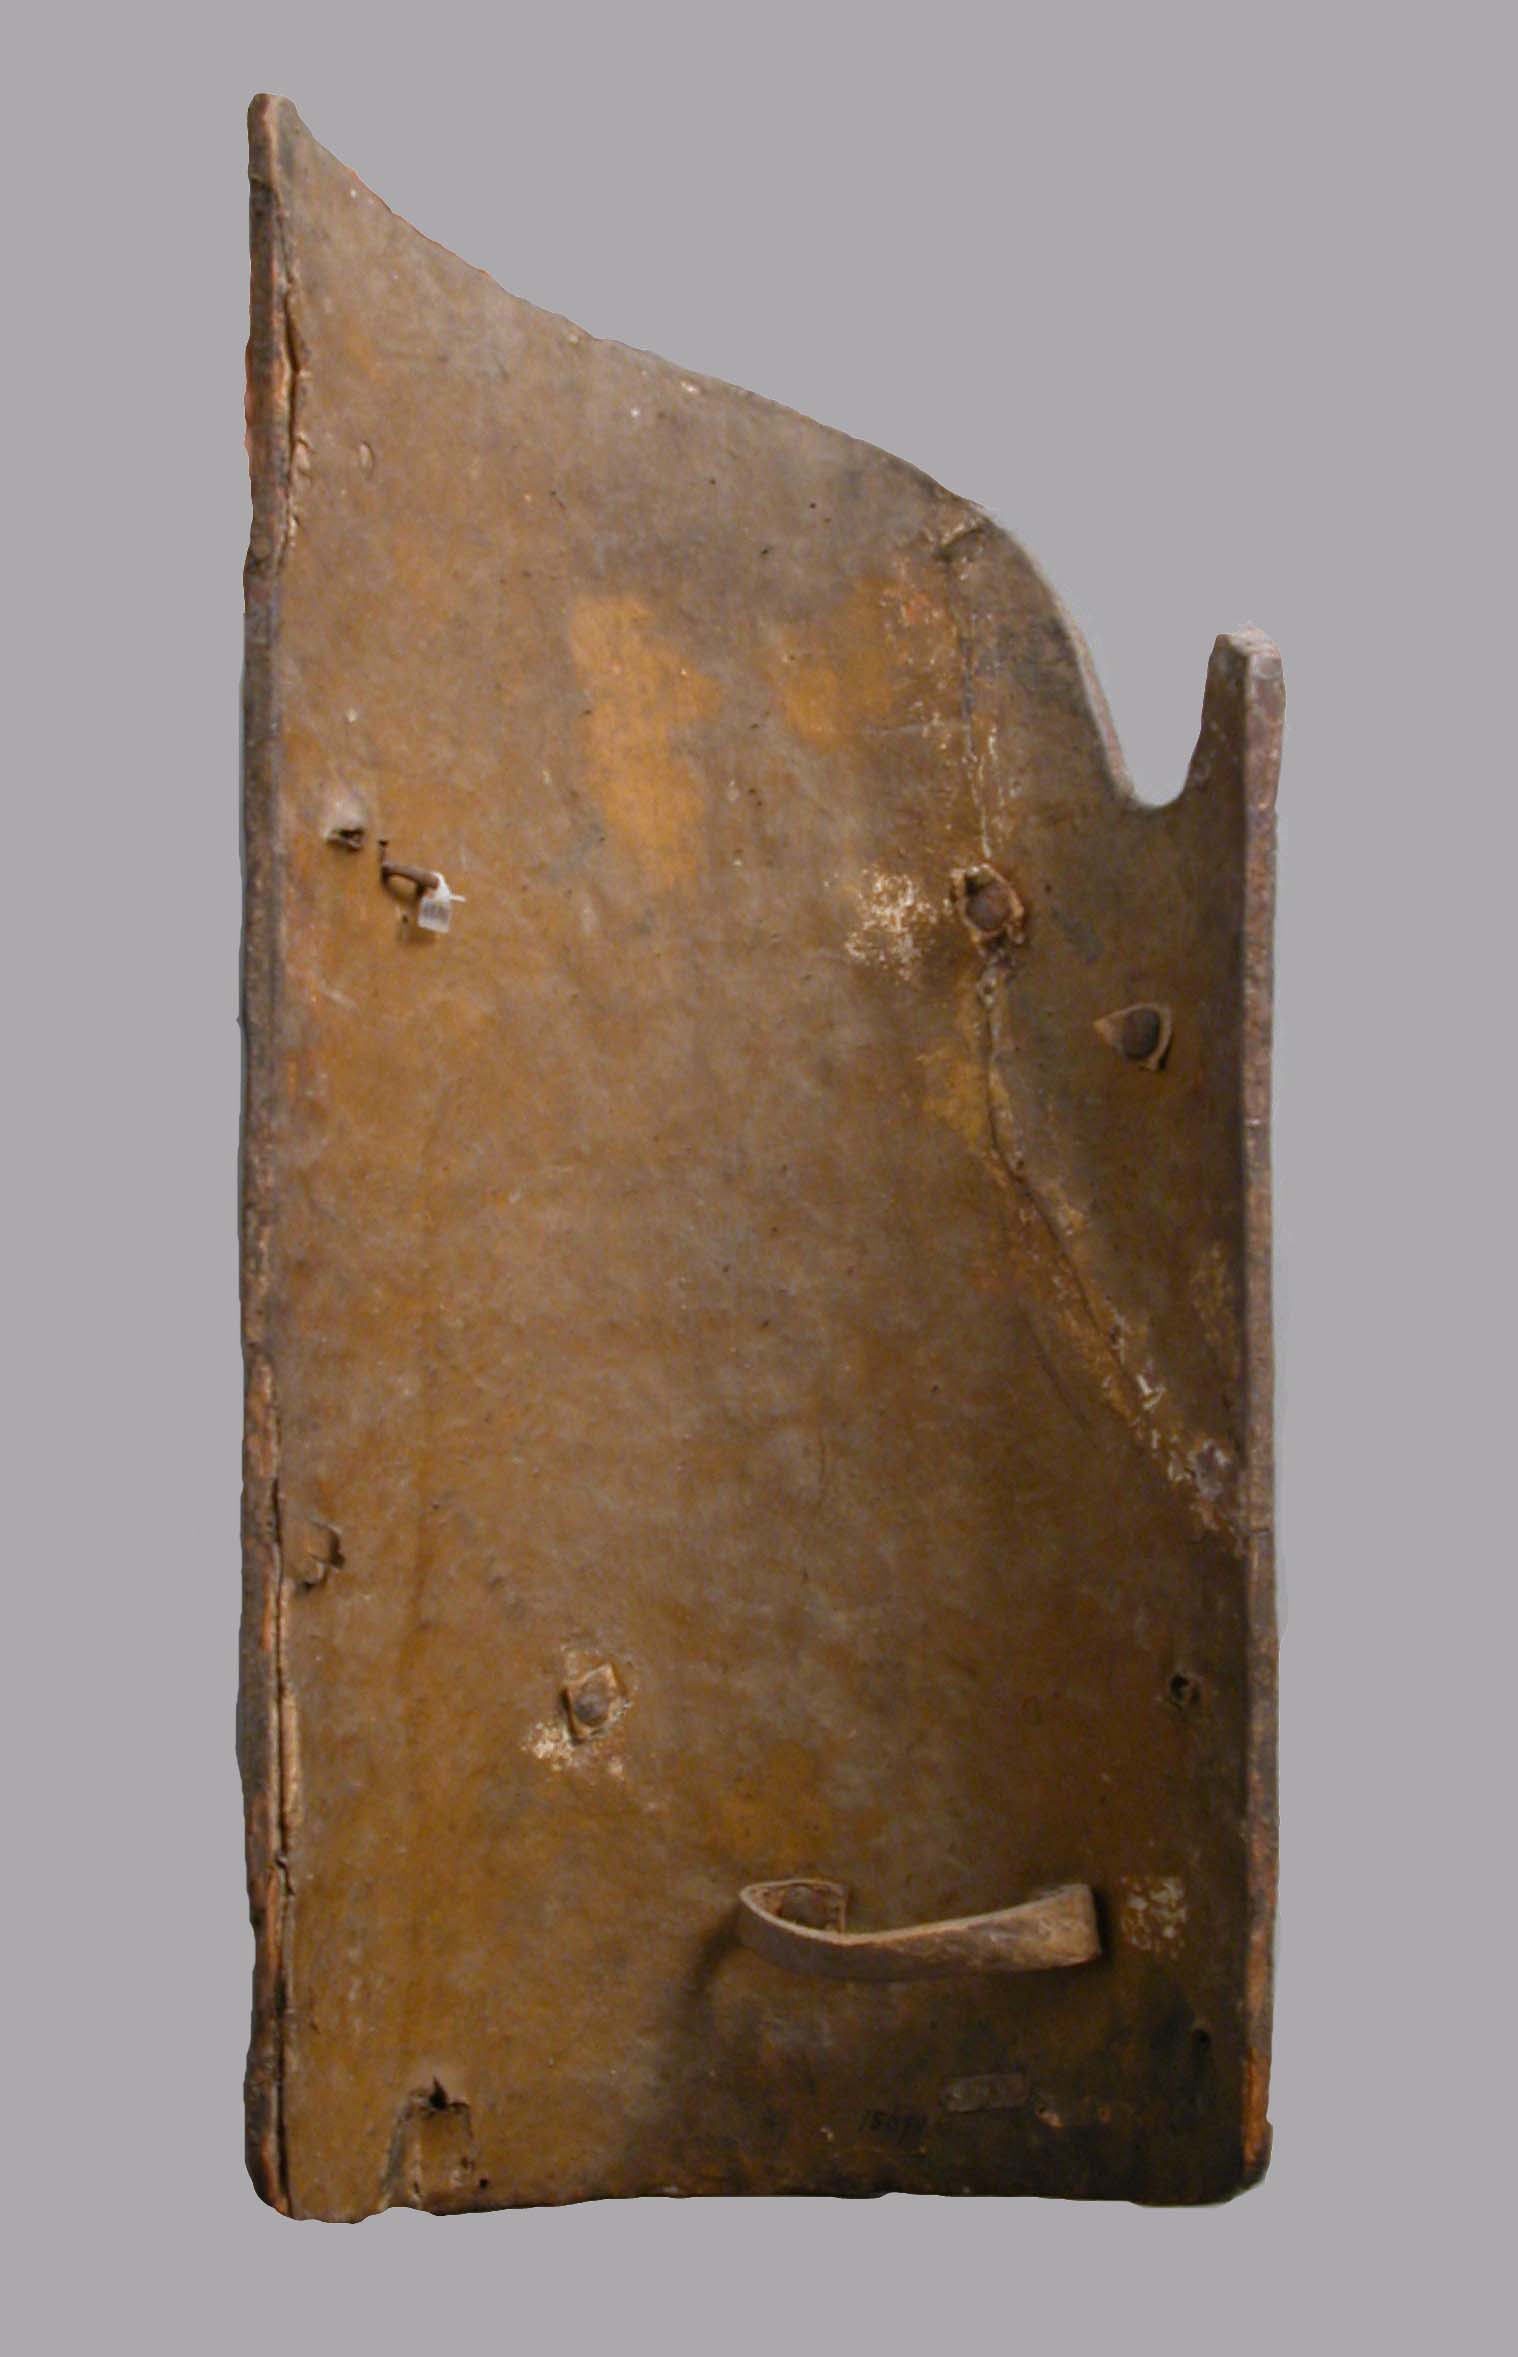 Shield for the Field or Tournament (Targe), German